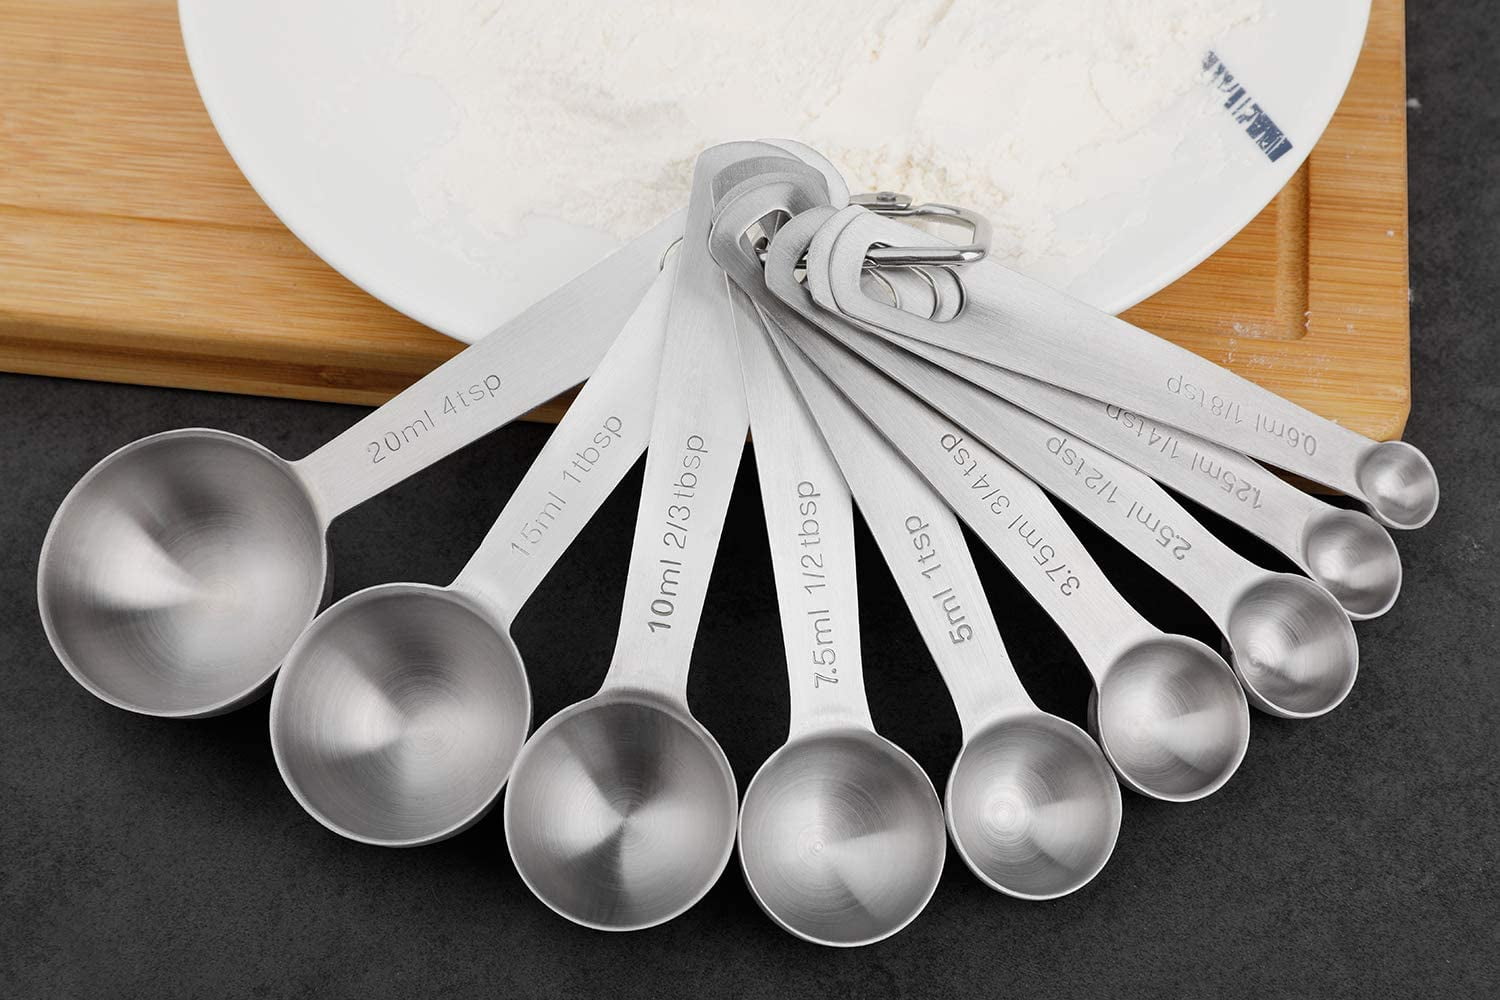 5PCS Small Measuring Spoons Set - Cuttte Stainless Steel Tiny Measuring  Spoons for Cooking Baking, 1/4 tsp, 1/8 tsp, 1/16 tsp, 1/32 tsp, 1/64 tsp,  Teaspoon Mini Measuring Spoons for Powders, Spices